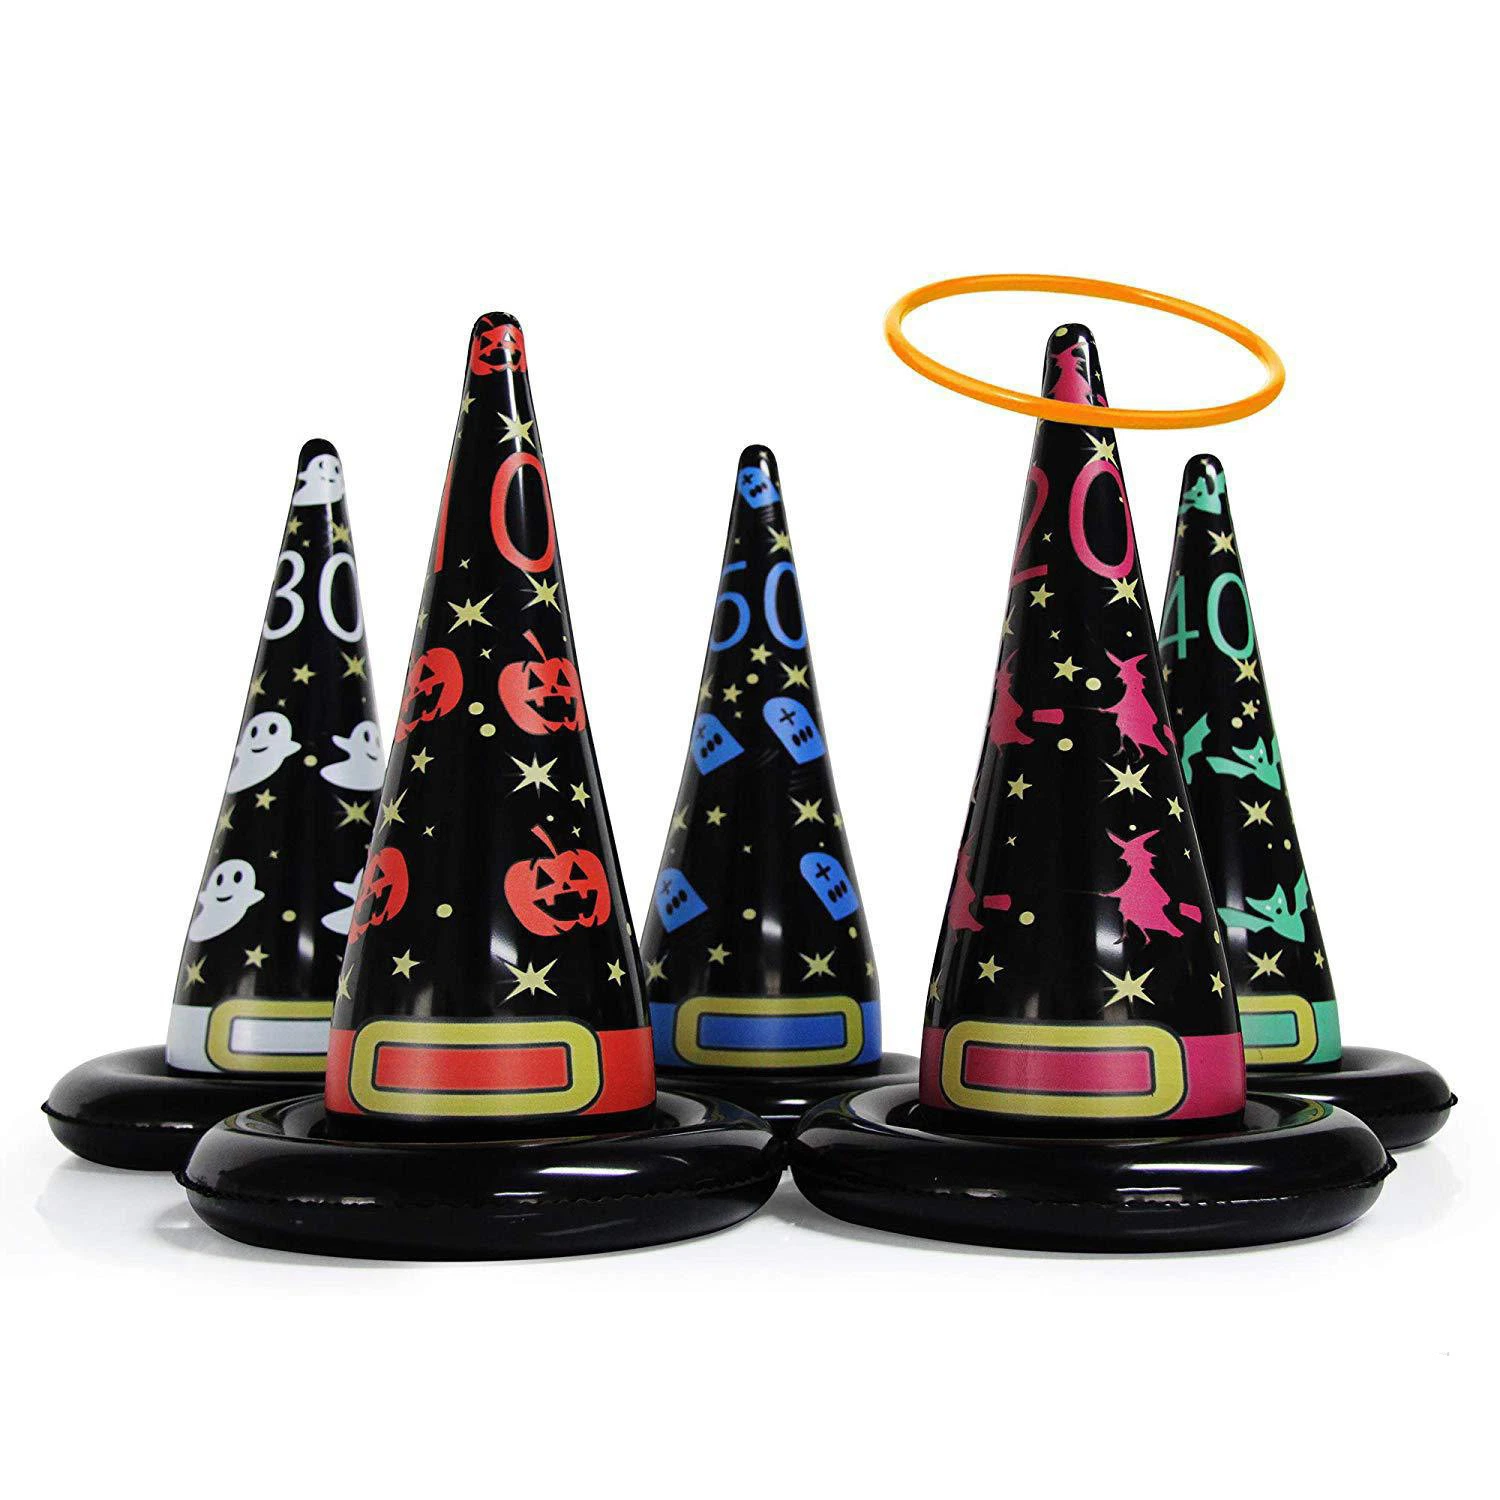 Hot Selling Inflatable Witch Hat Lap Game Throwing Hat Lap High Quality Halloween Party Games Inflatable Toys Holiday Props